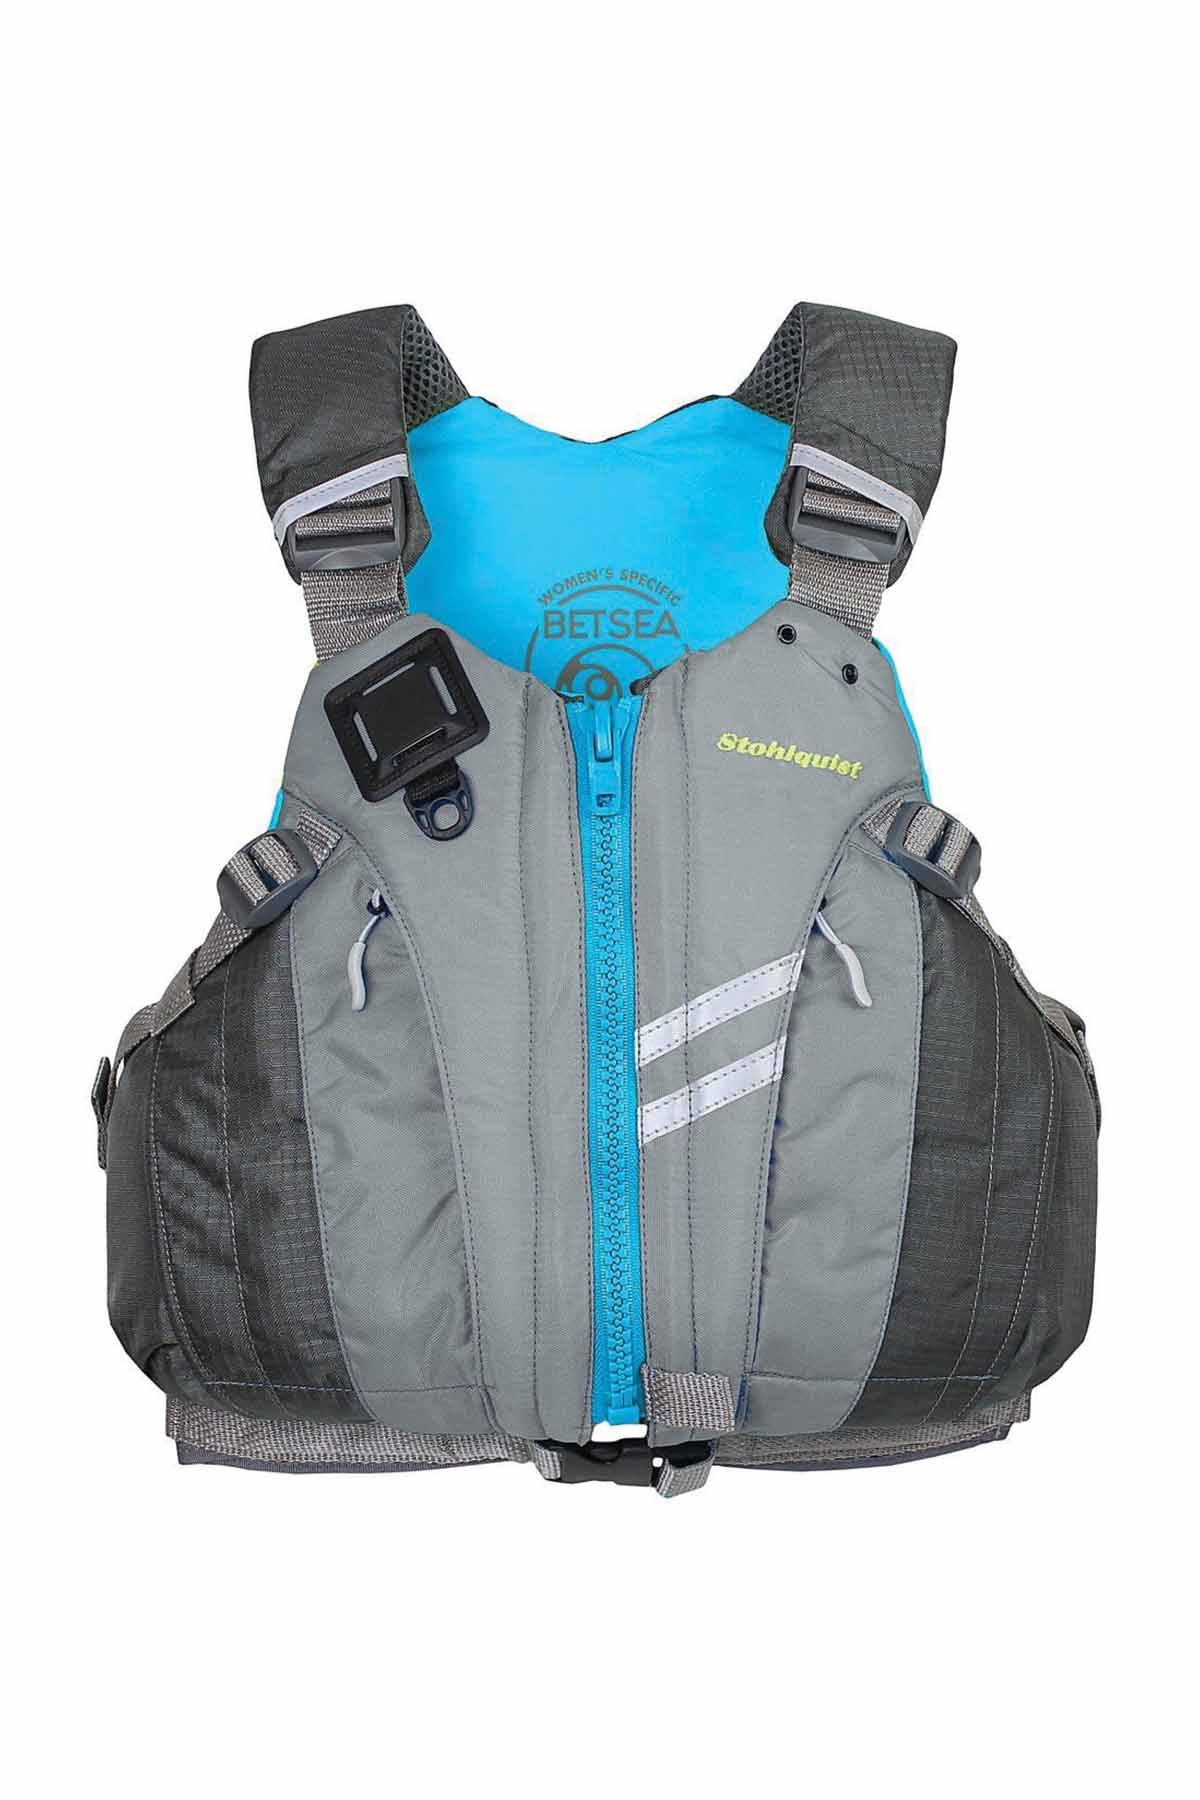 Stohlquist Women's Specific PFD with Wrapture Foam Front